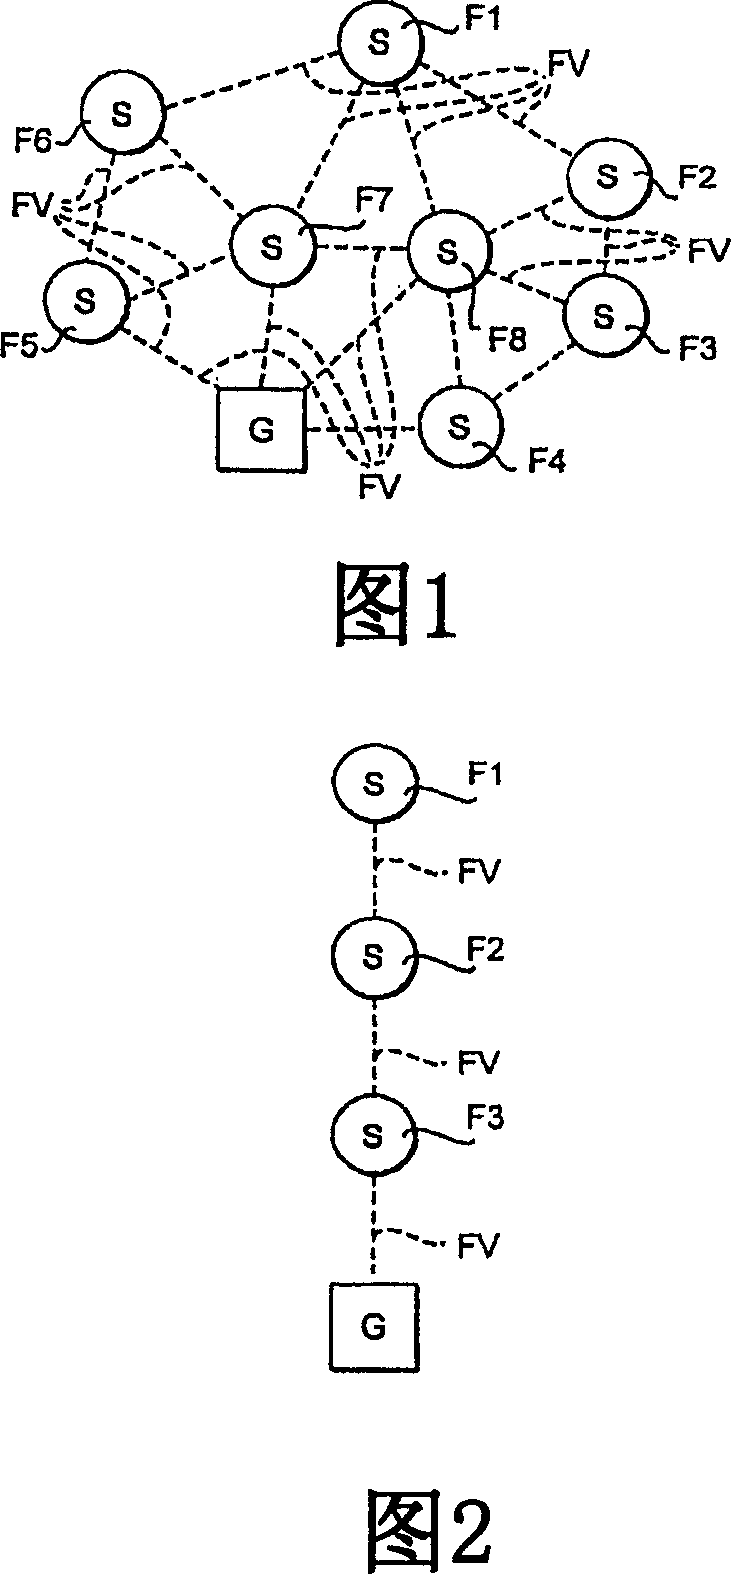 Radio module for field appliances used in automation systems